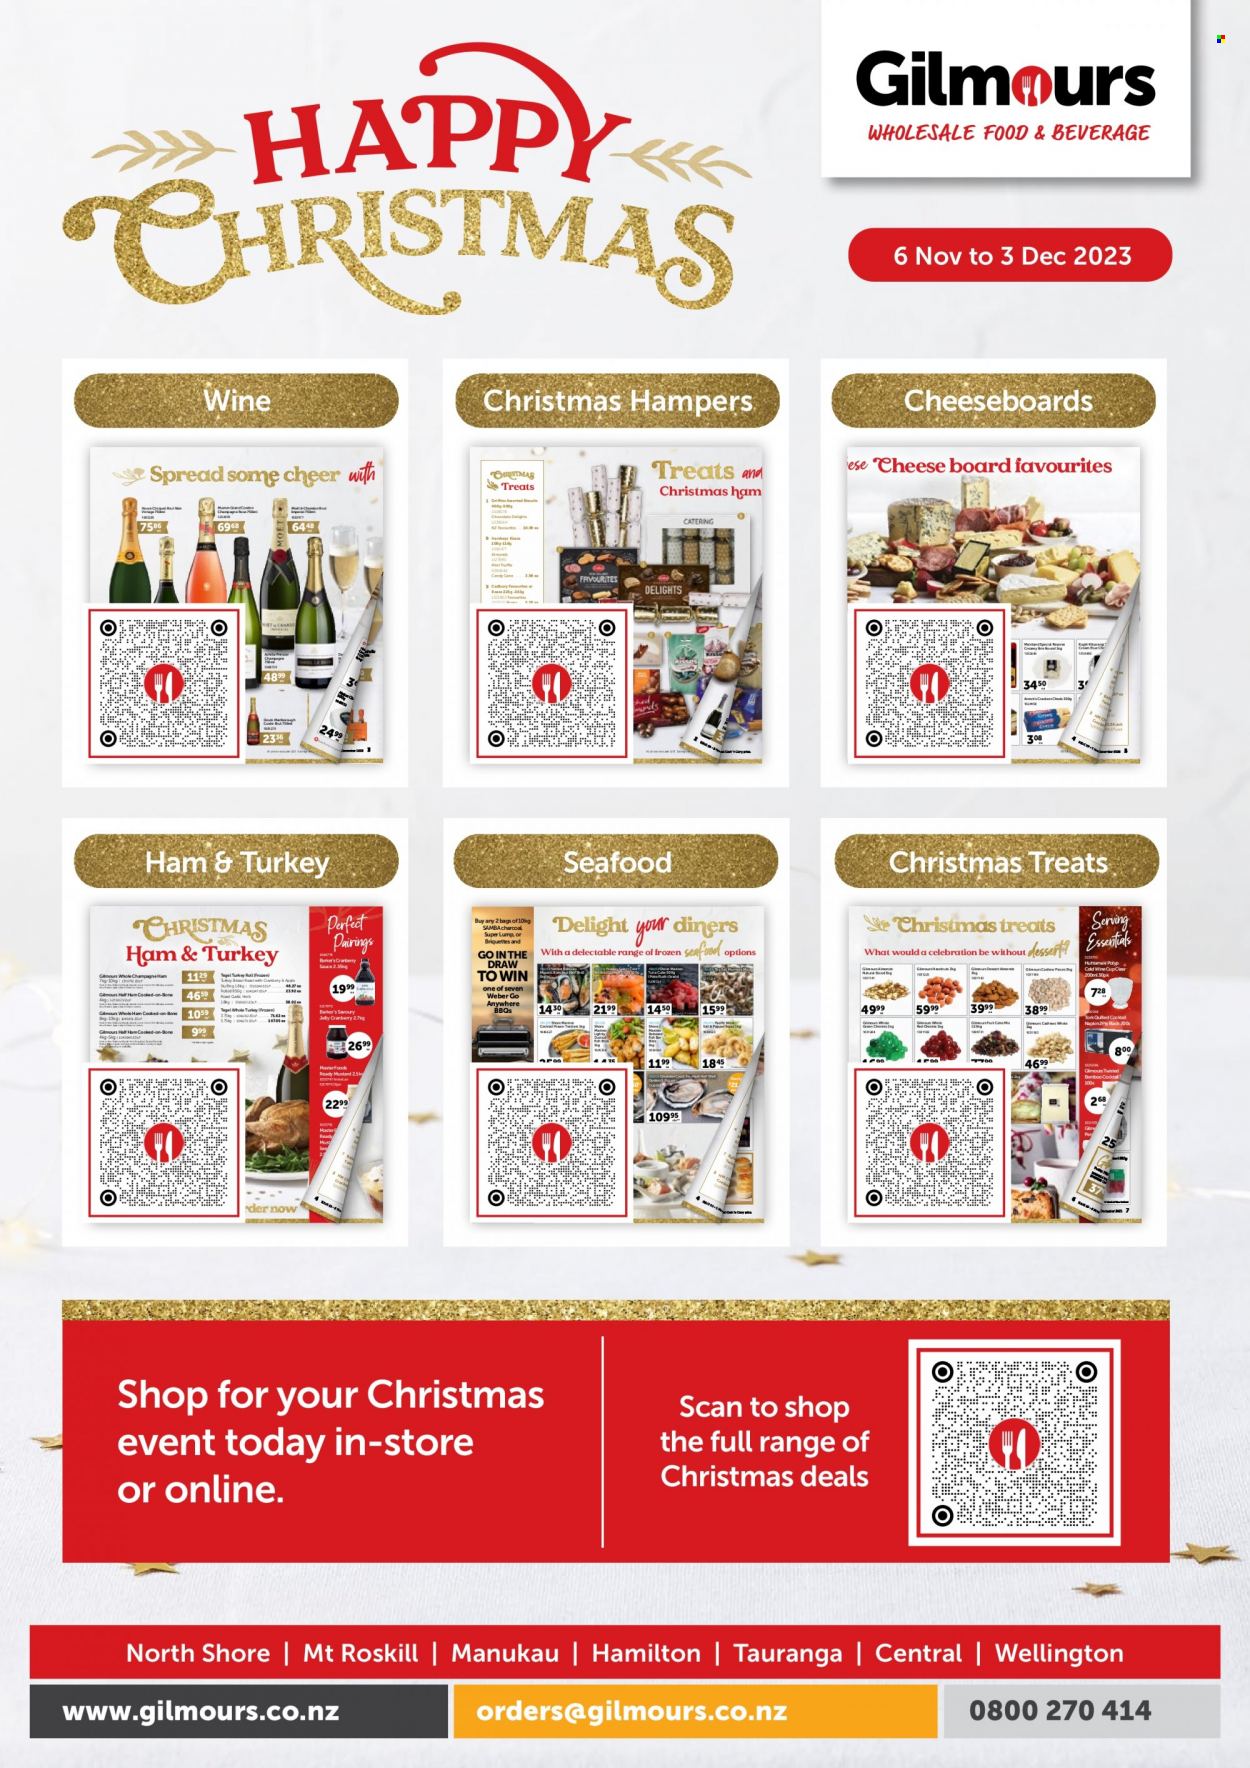 Gilmours mailer - 06.11.2023 - 03.12.2023 - Sales products - christmas hamper, dessert, seafood, sauce, roast, half ham, ham, hamper, Hershey's, candy cane, truffles, jelly, Celebration, crackers, biscuit, Cadbury, chocolate candies, Candy, mint, mustard, cranberry sauce, almonds, sparkling wine, champagne, wine, Moët & Chandon, alcohol, turkey, napkins. Page 1.